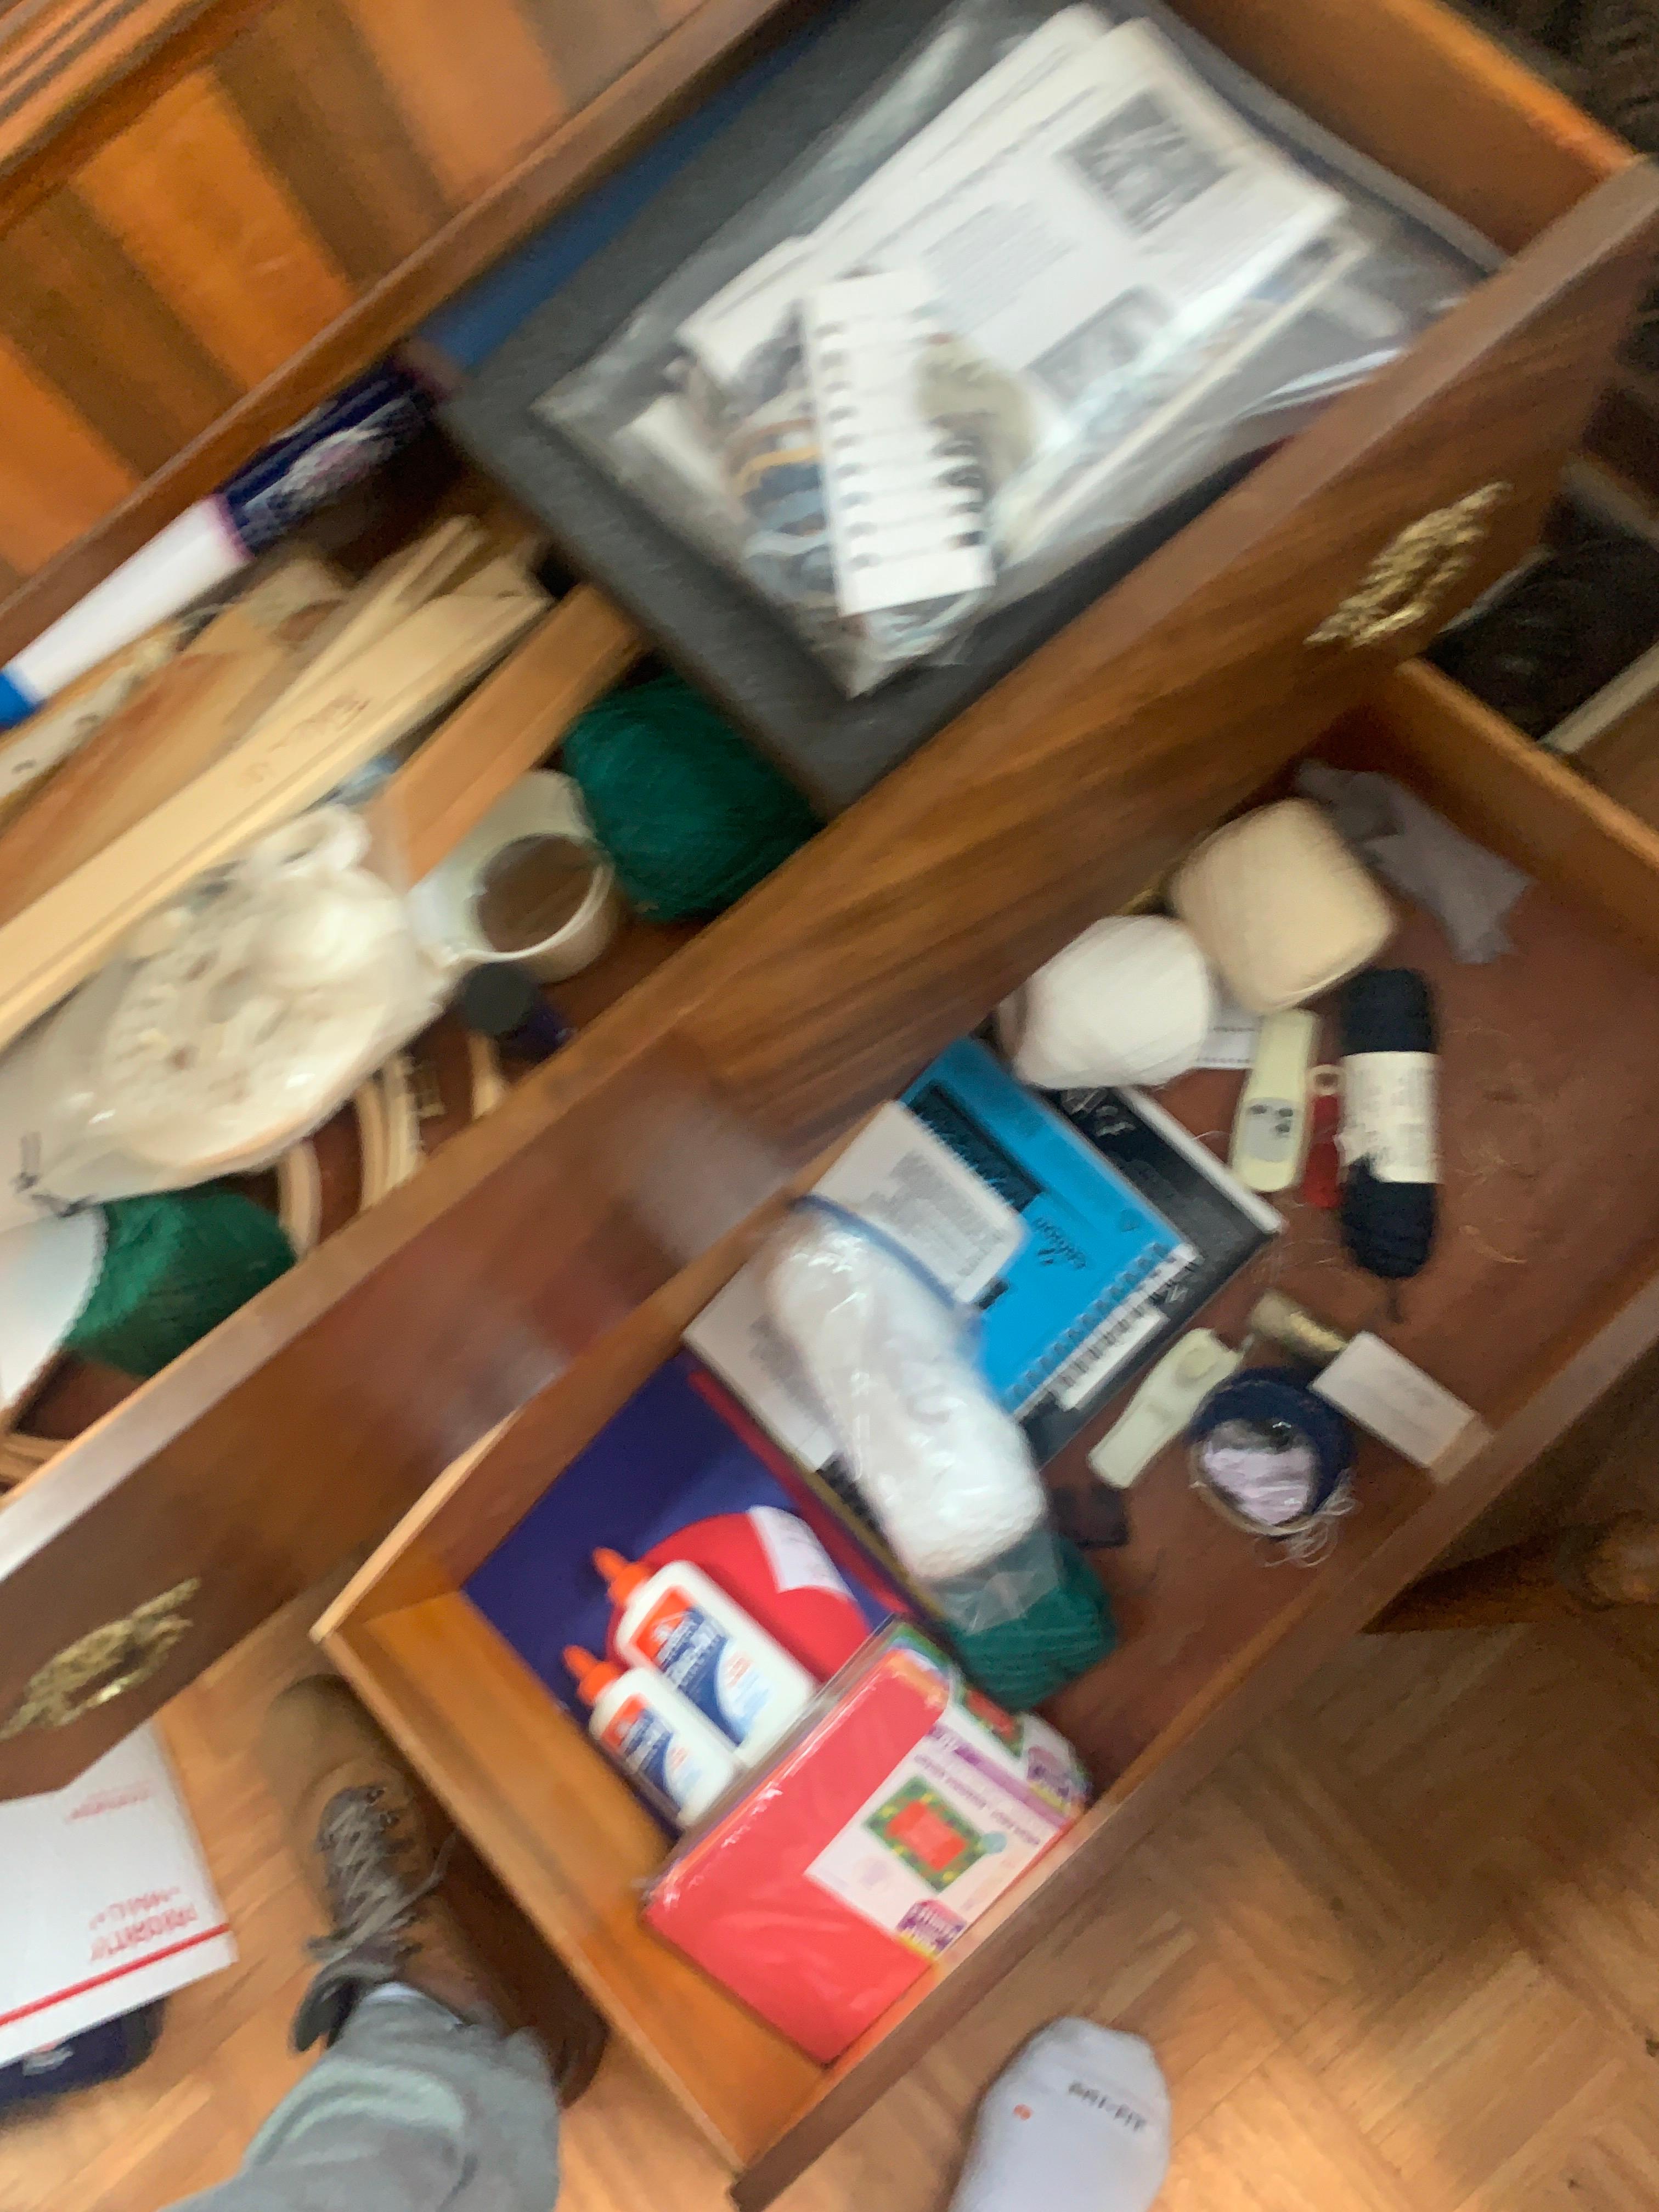 Several Drawers Full Of Crafting Supplies, Glue, Yard, Paper, Etc…